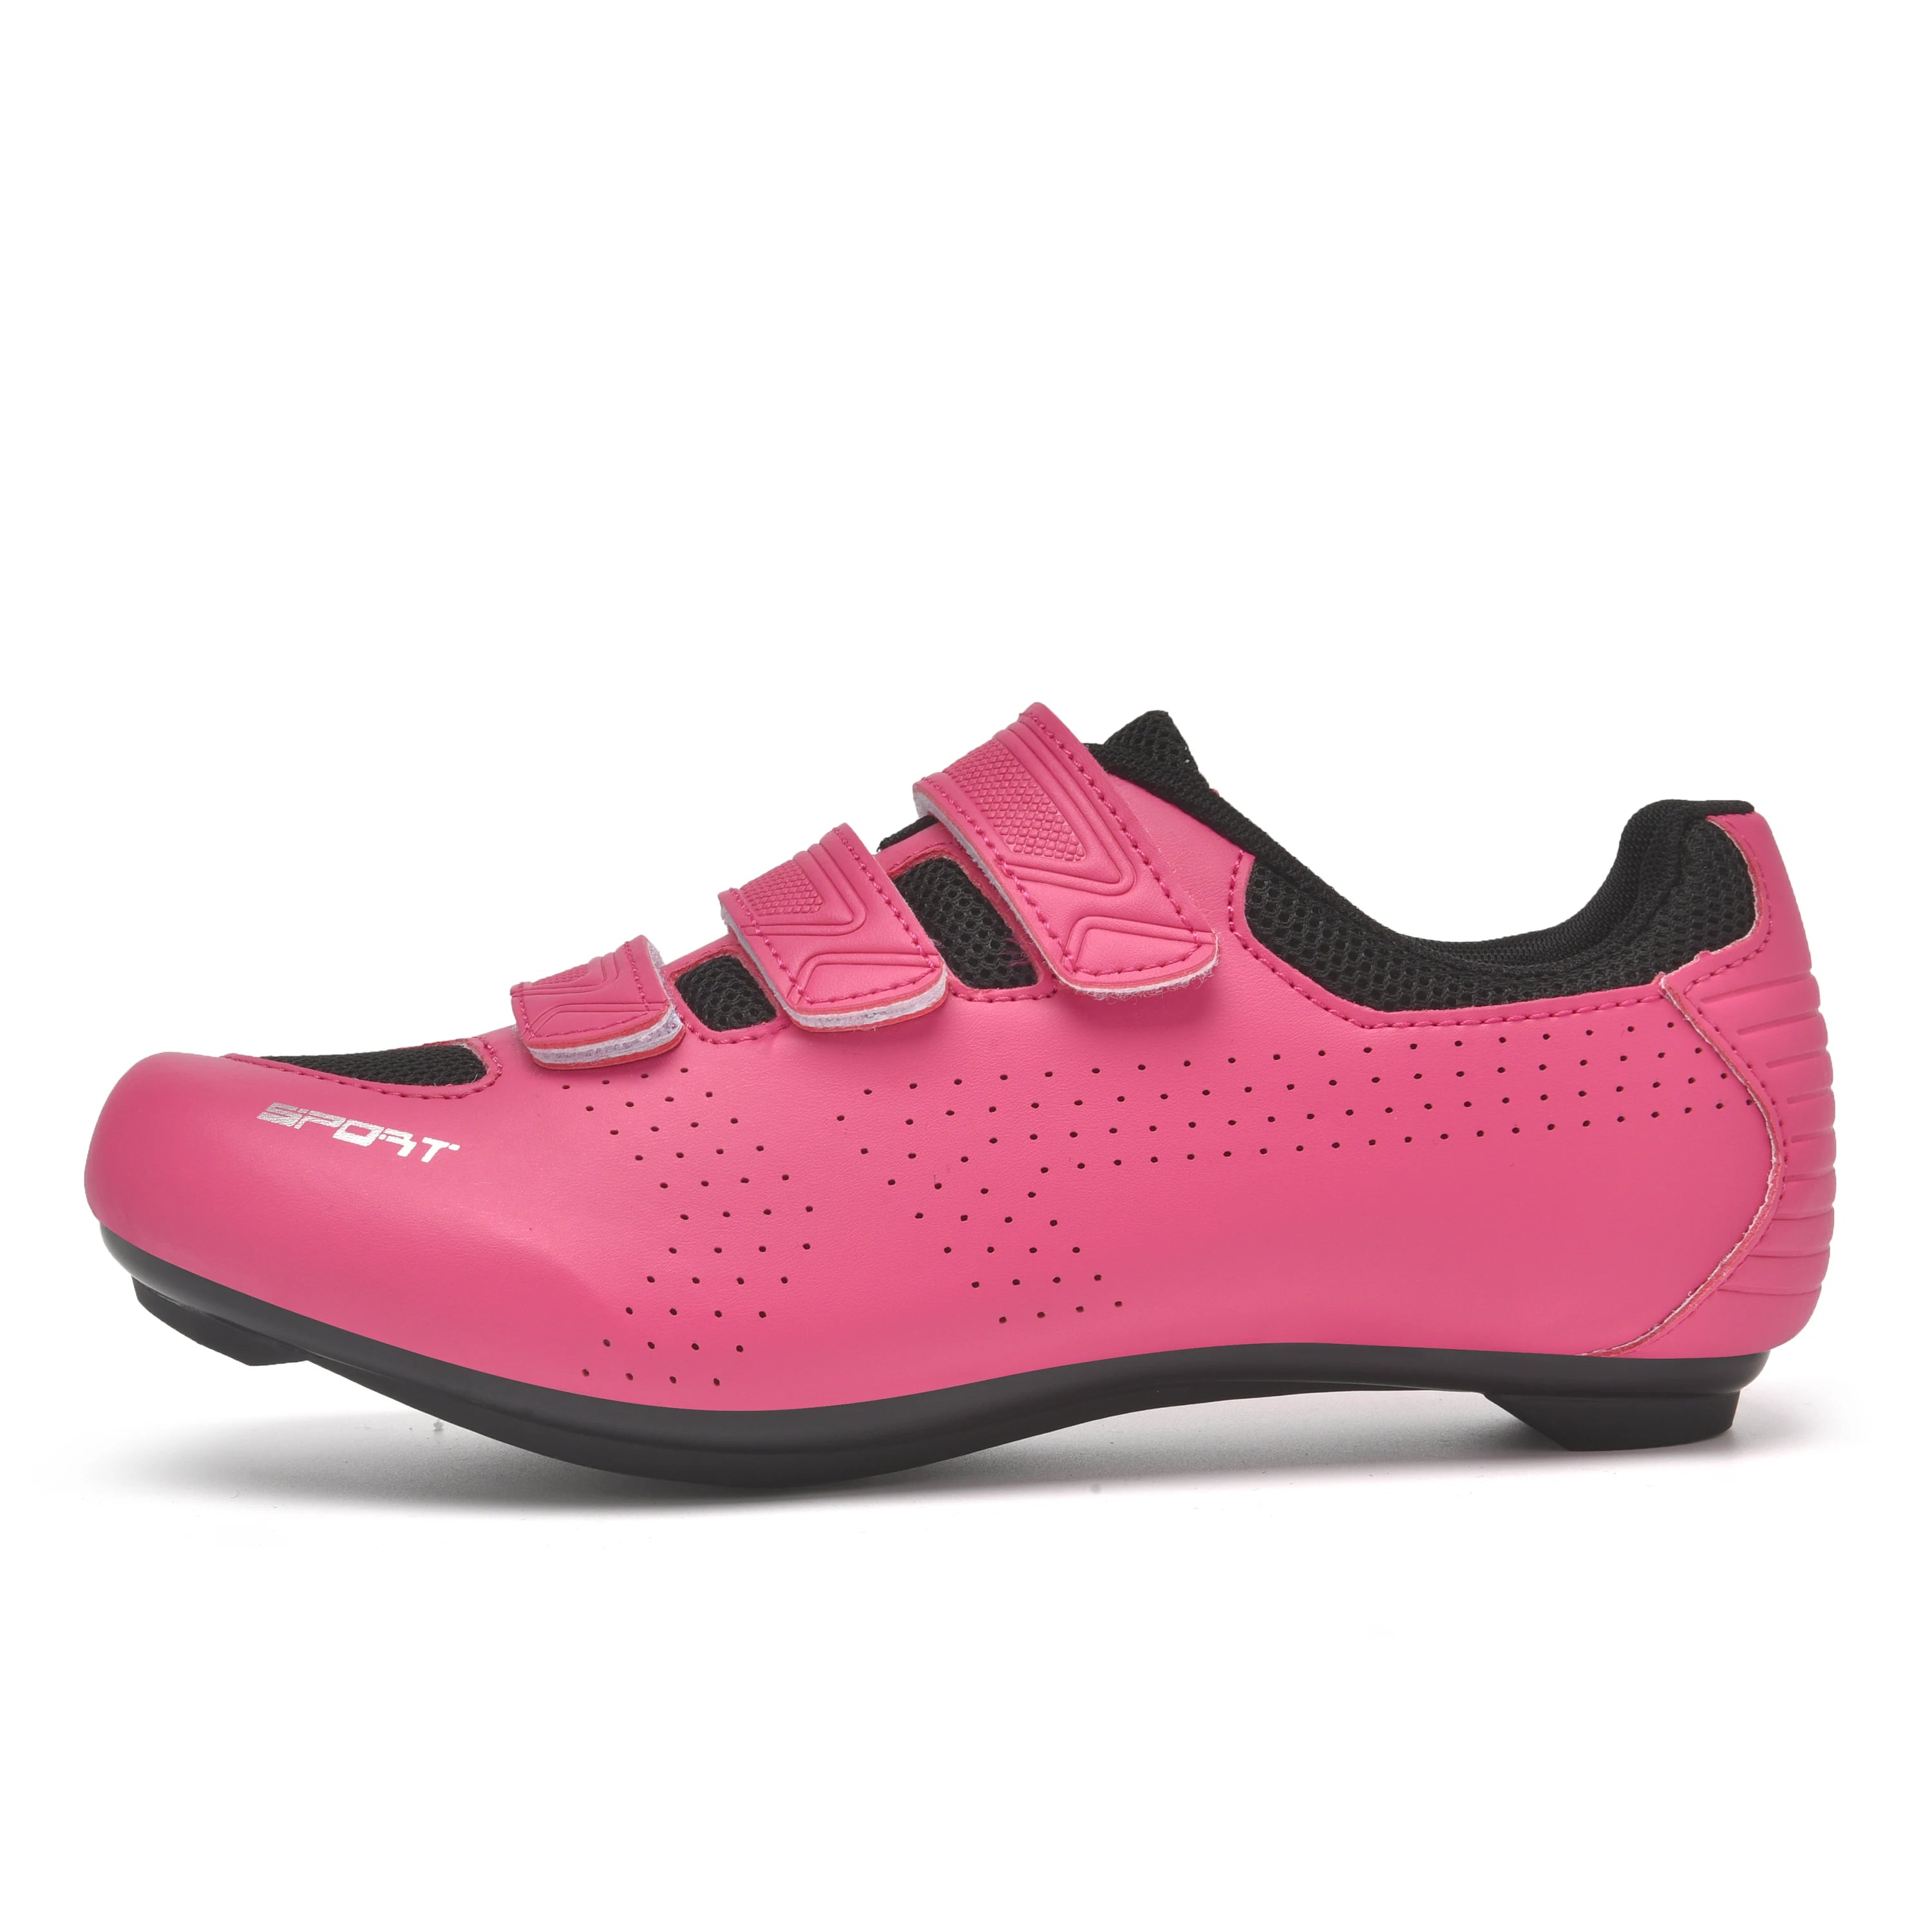 Women Cycling Shoes for Road or Mountain bike- With Cleats,  Cleatless, or flat rubber single